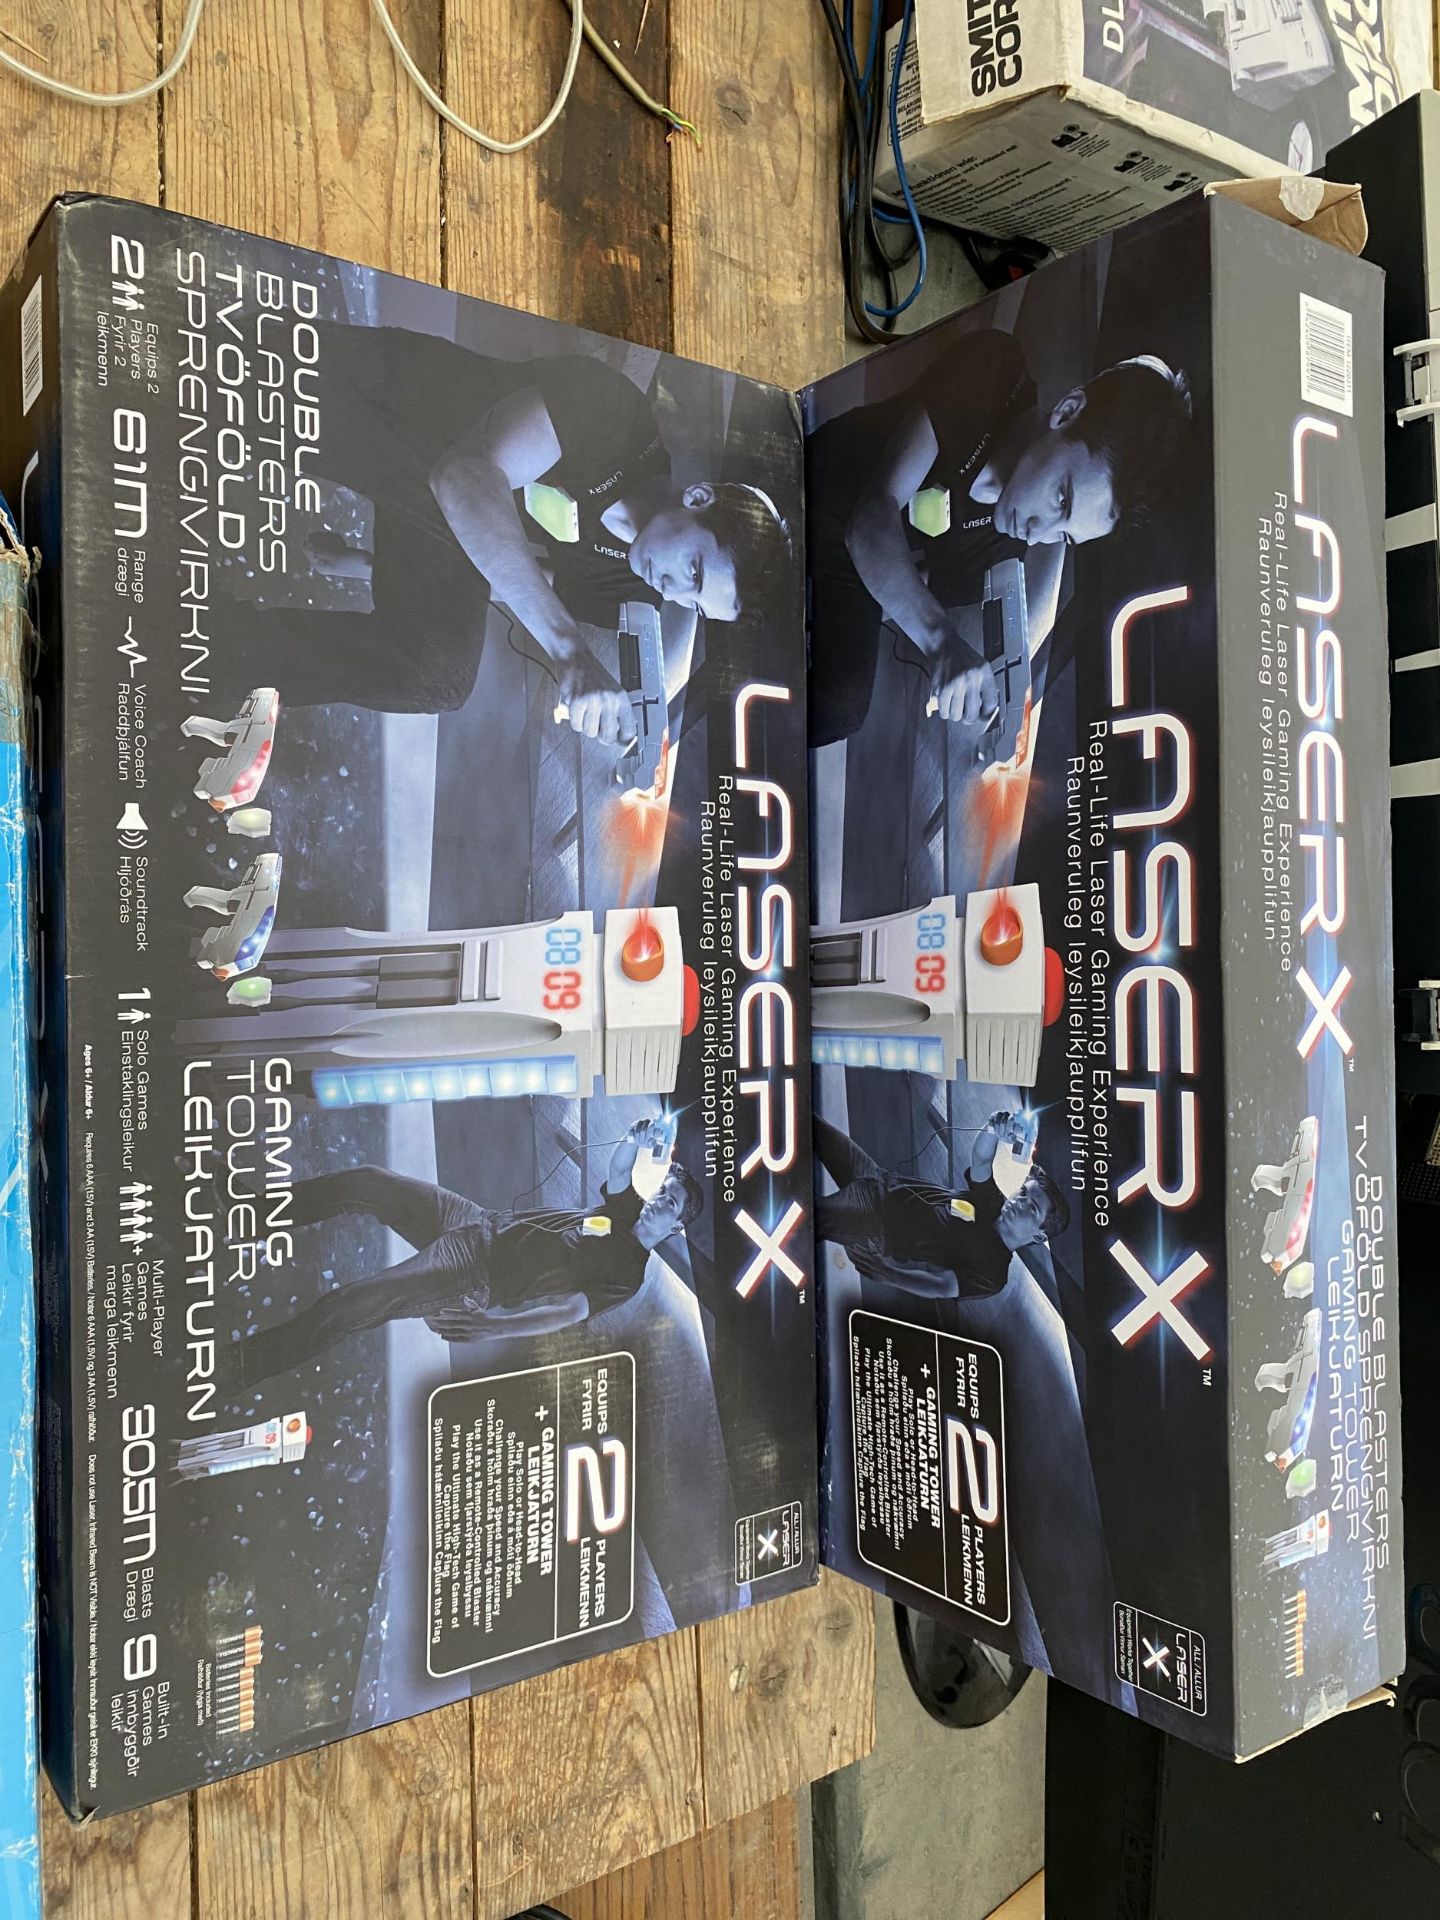 A CASIO KEYBOARD AND TWO LASERX GAMES - Image 2 of 3